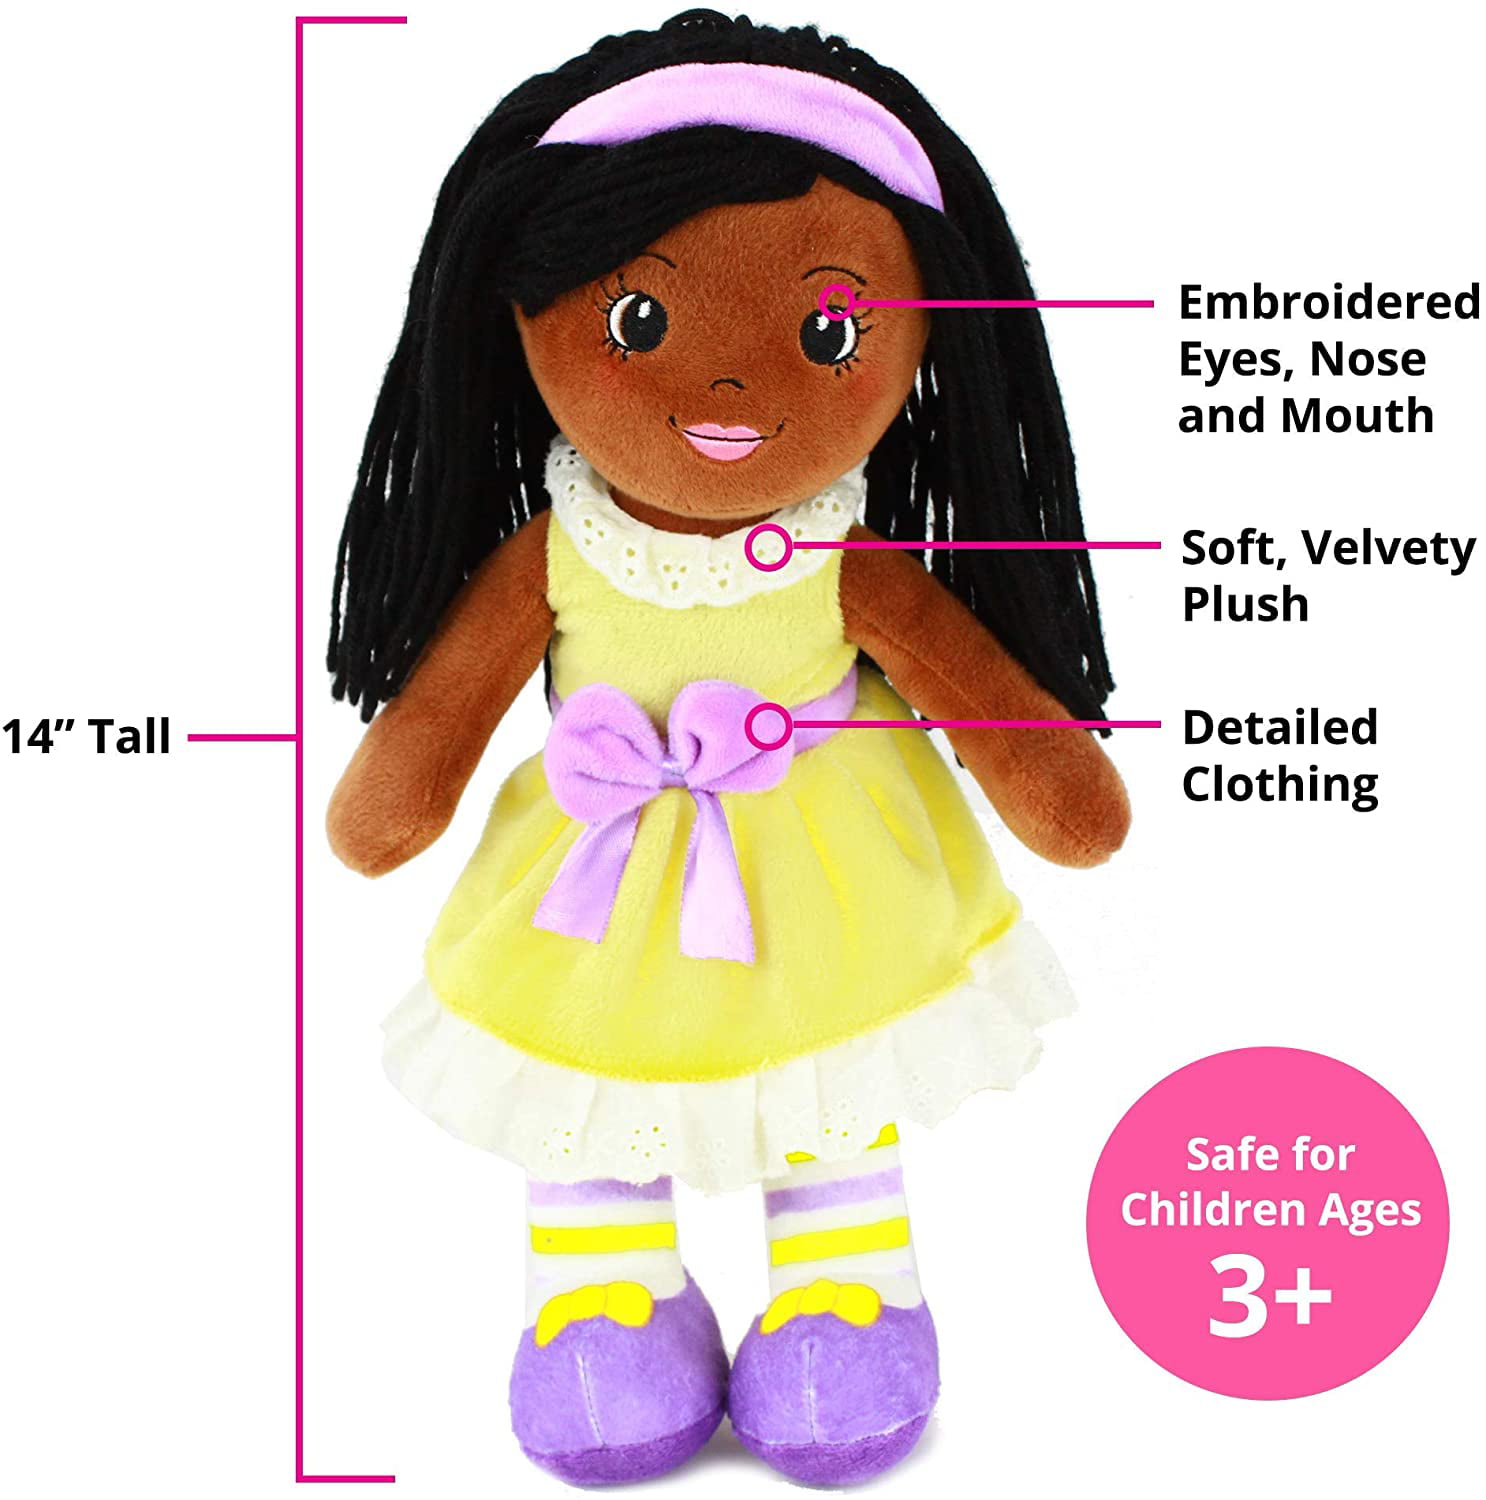 14” First Baby Doll for Kids Plush Baby Toy Julie The Salsa Dancer Playtime by Eimmie Soft Rag Doll Safe for All Ages 